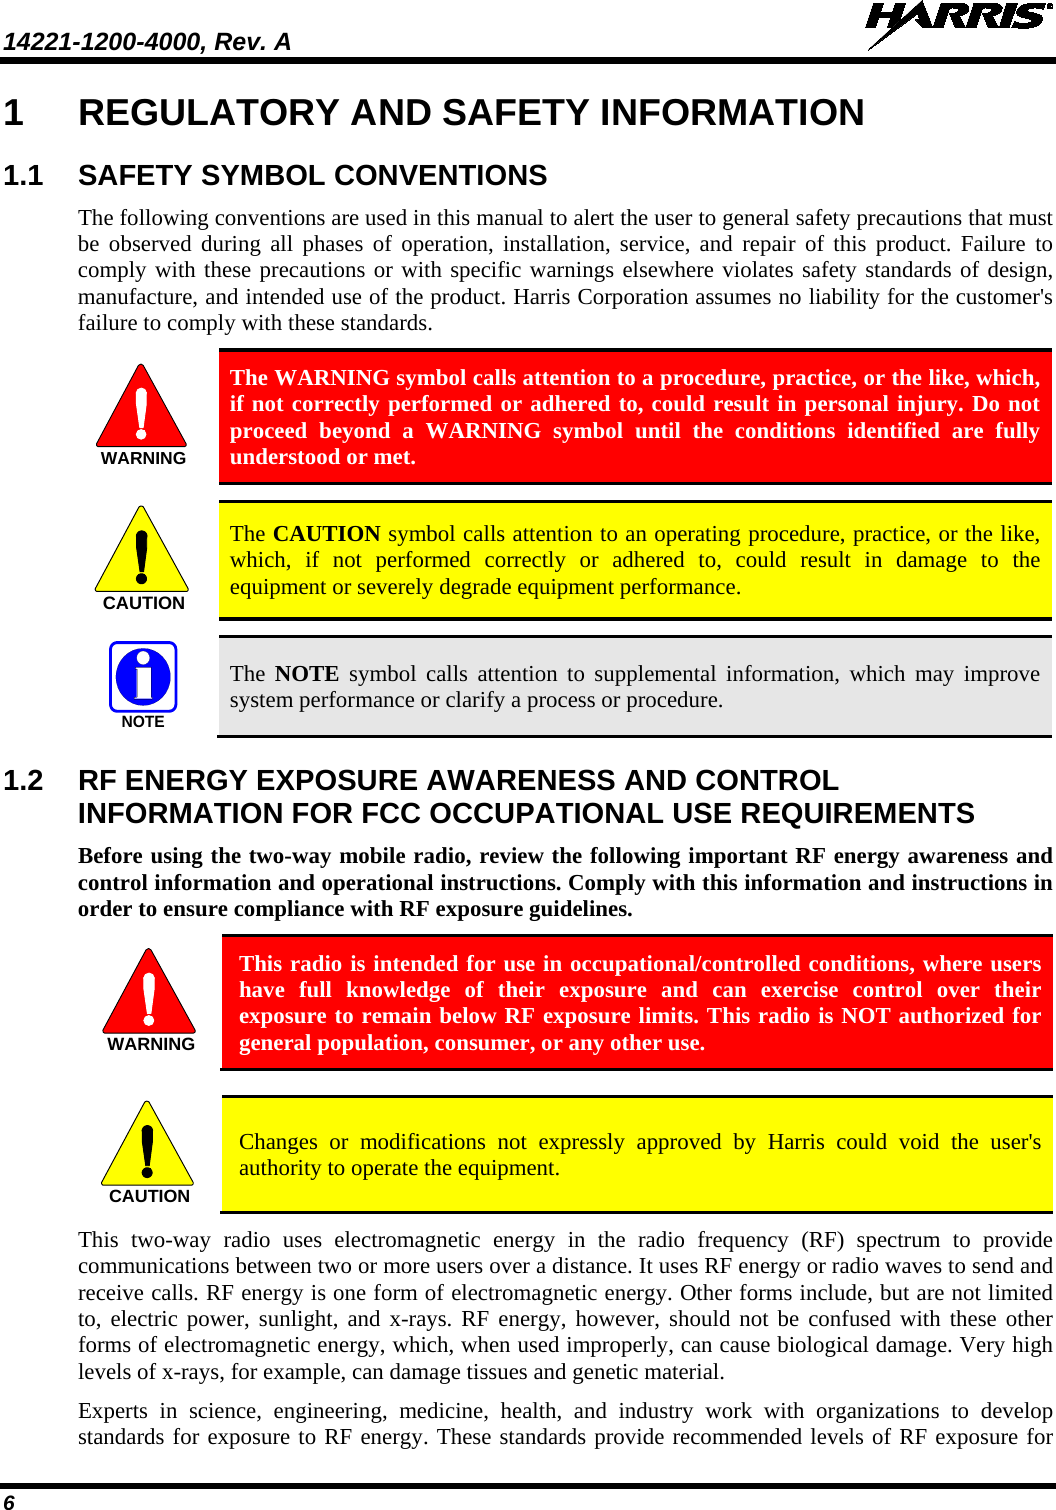 14221-1200-4000, Rev. A    6 1  REGULATORY AND SAFETY INFORMATION 1.1  SAFETY SYMBOL CONVENTIONS The following conventions are used in this manual to alert the user to general safety precautions that must be observed during all phases of operation, installation, service, and repair of this product. Failure to comply with these precautions or with specific warnings elsewhere violates safety standards of design, manufacture, and intended use of the product. Harris Corporation assumes no liability for the customer&apos;s failure to comply with these standards. WARNING The WARNING symbol calls attention to a procedure, practice, or the like, which, if not correctly performed or adhered to, could result in personal injury. Do not proceed beyond a WARNING symbol until the conditions identified are fully understood or met.    CAUTION The CAUTION symbol calls attention to an operating procedure, practice, or the like, which, if not performed correctly or adhered to, could result in damage to the equipment or severely degrade equipment performance.   NOTE The  NOTE symbol calls attention to supplemental information, which may improve system performance or clarify a process or procedure. 1.2  RF ENERGY EXPOSURE AWARENESS AND CONTROL INFORMATION FOR FCC OCCUPATIONAL USE REQUIREMENTS Before using the two-way mobile radio, review the following important RF energy awareness and control information and operational instructions. Comply with this information and instructions in order to ensure compliance with RF exposure guidelines.  This radio is intended for use in occupational/controlled conditions, where users have full knowledge of their exposure and can exercise control over their exposure to remain below RF exposure limits. This radio is NOT authorized for general population, consumer, or any other use.   Changes or modifications not expressly approved by Harris could void the user&apos;s authority to operate the equipment. This two-way radio uses electromagnetic energy in the radio frequency (RF) spectrum to provide communications between two or more users over a distance. It uses RF energy or radio waves to send and receive calls. RF energy is one form of electromagnetic energy. Other forms include, but are not limited to, electric power, sunlight, and x-rays. RF energy, however, should not be confused with these other forms of electromagnetic energy, which, when used improperly, can cause biological damage. Very high levels of x-rays, for example, can damage tissues and genetic material. Experts in science, engineering, medicine, health, and industry work with organizations to develop standards for exposure to RF energy. These standards provide recommended levels of RF exposure for WARNINGCAUTION